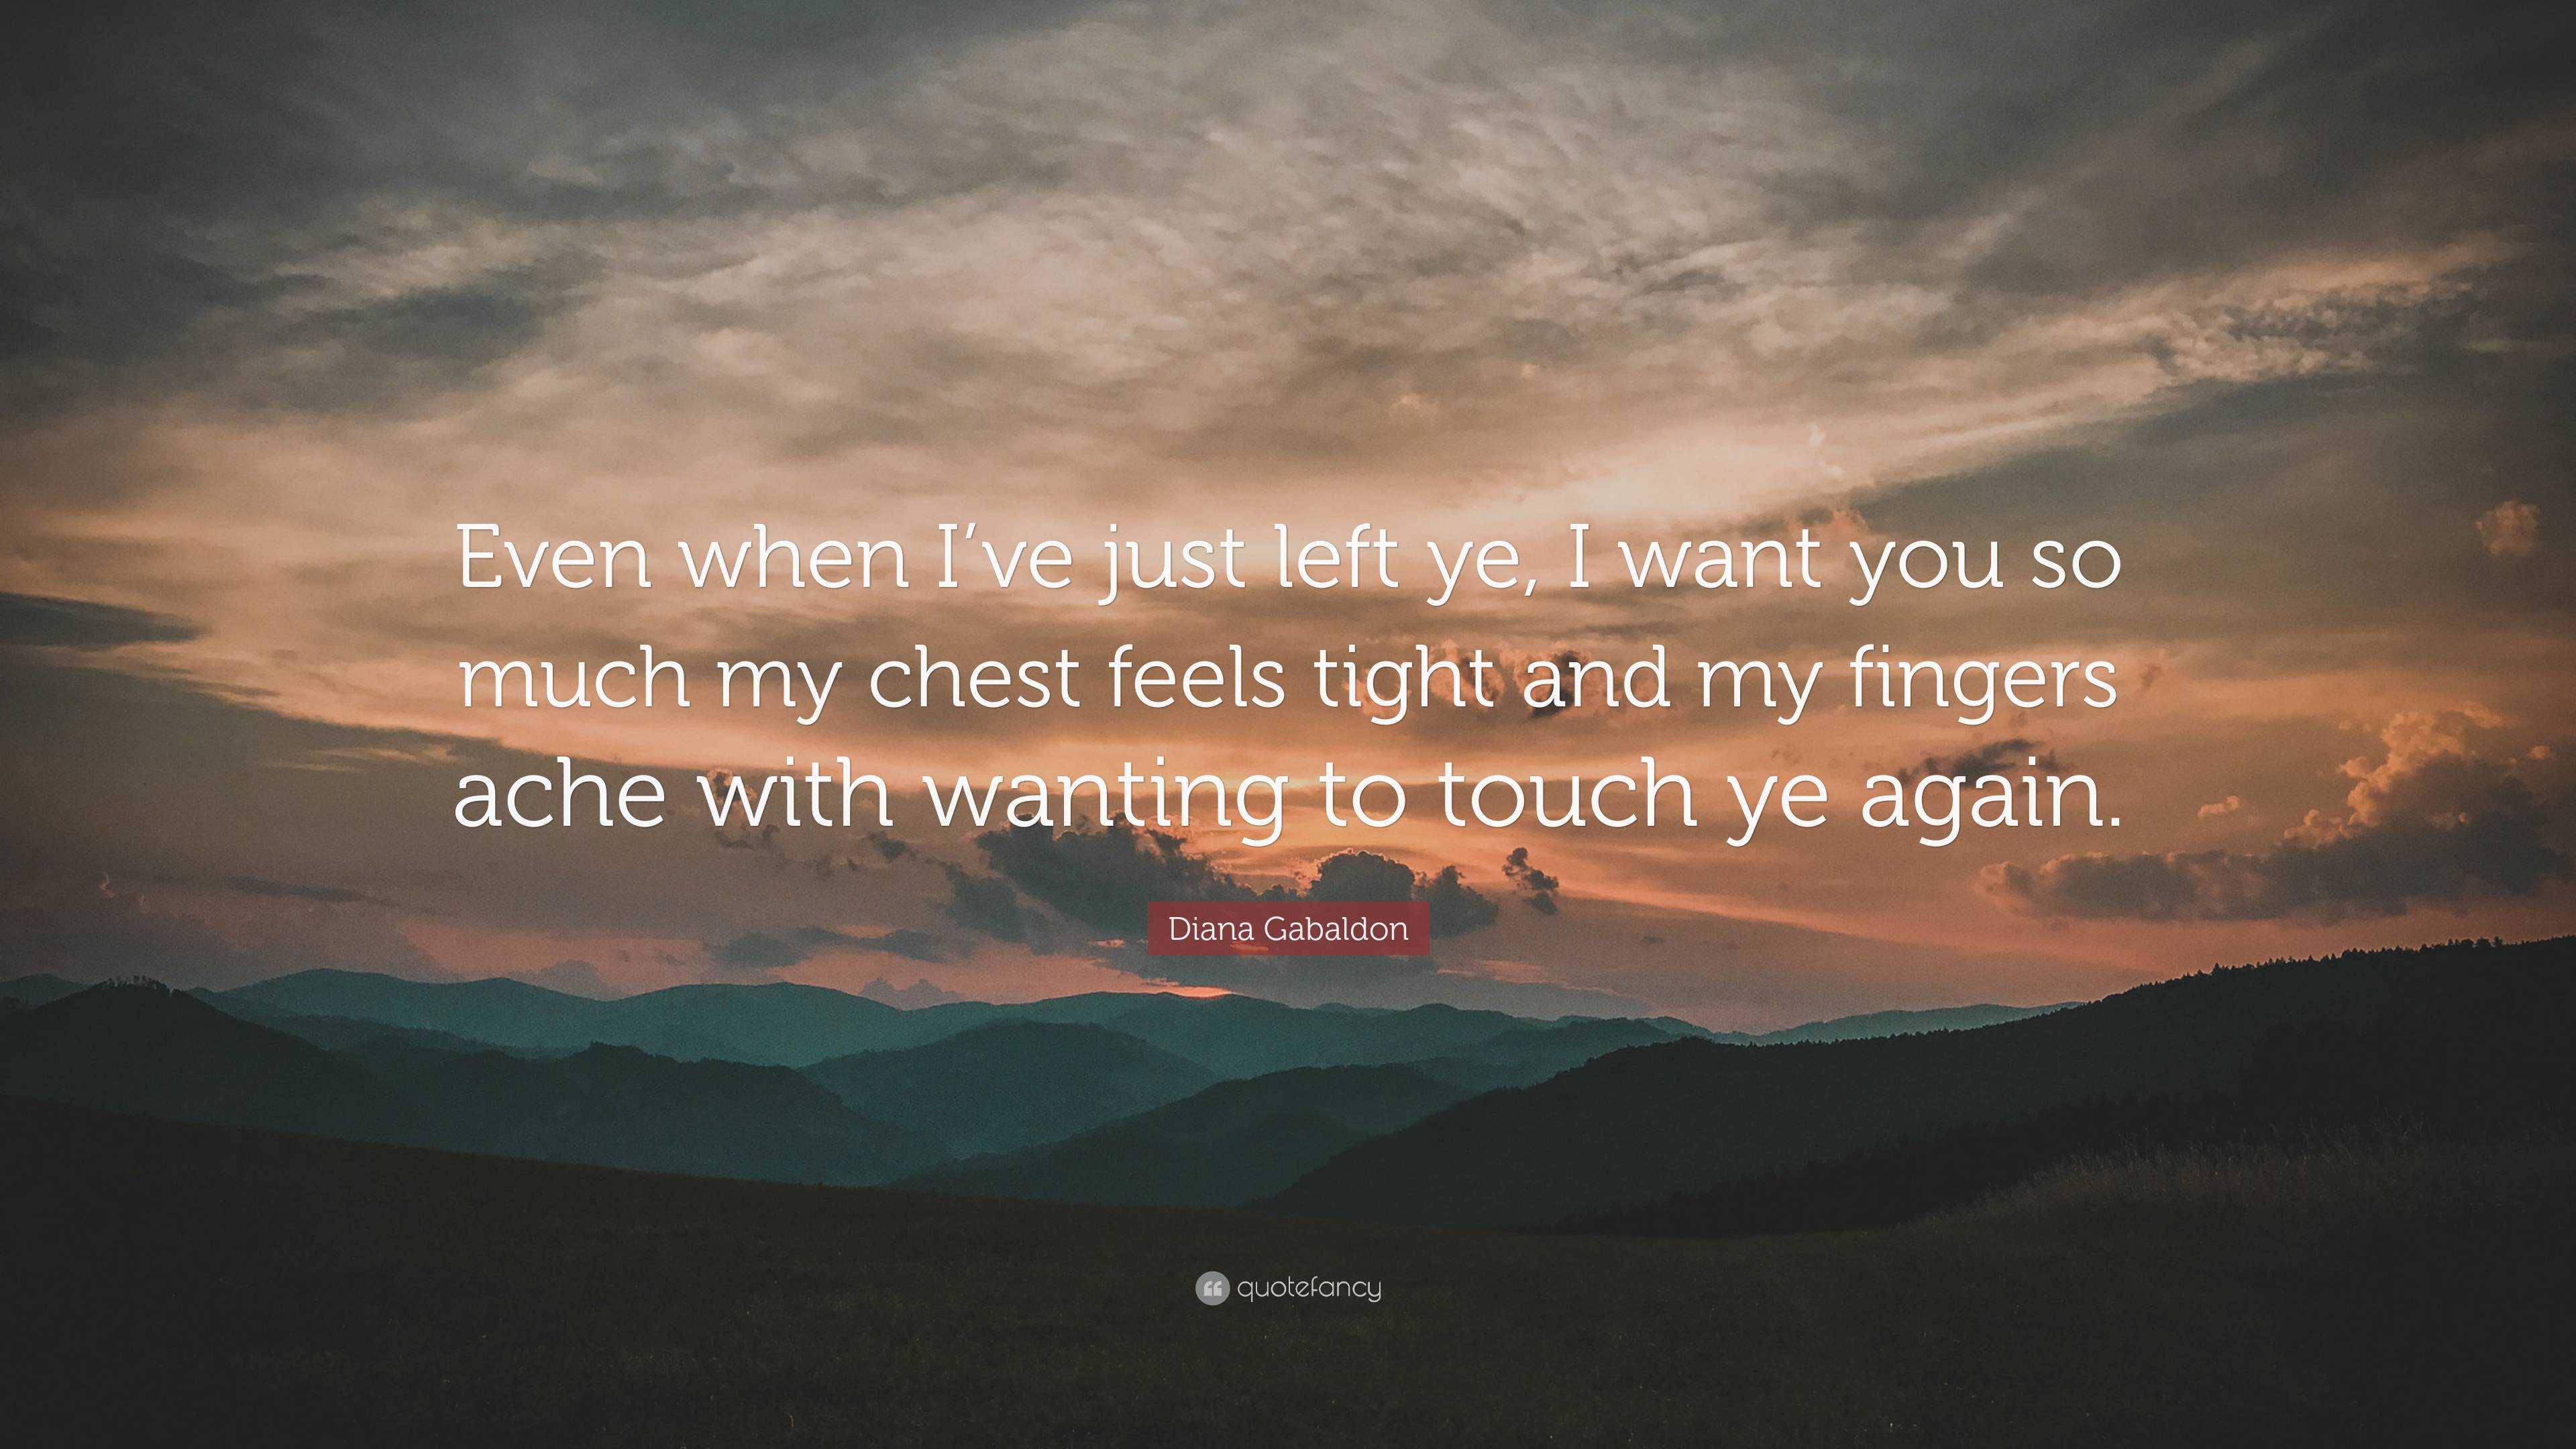 Diana Gabaldon Quote: “Even when I’ve just left ye, I want you so much ...